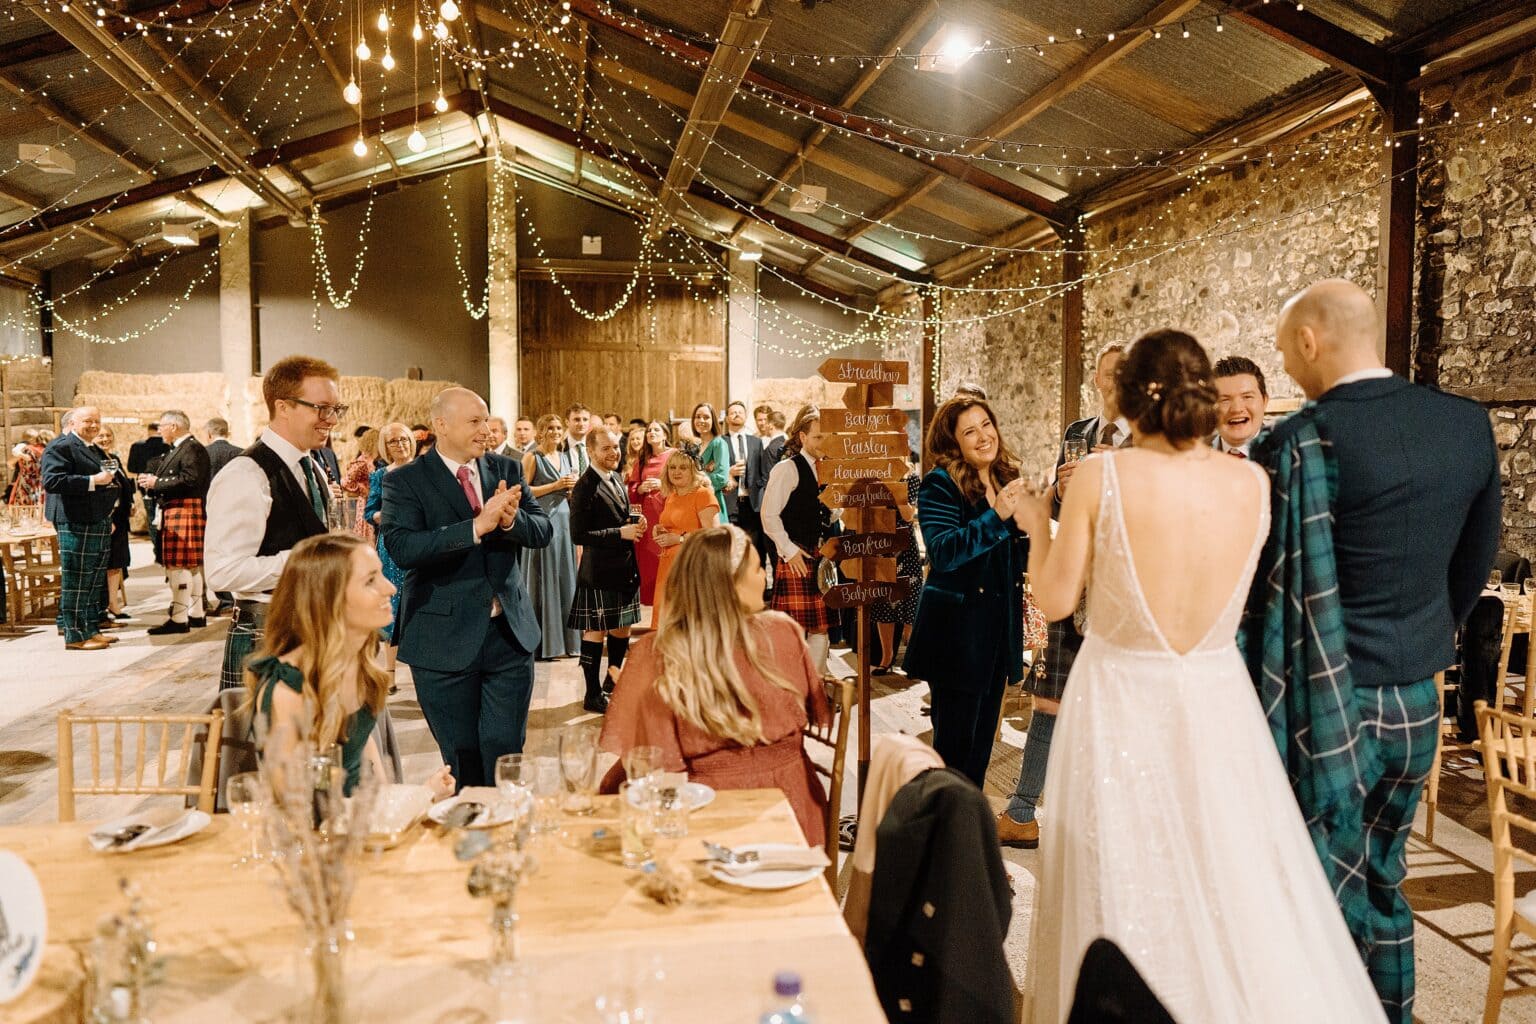 guests stand and applaud beneath festoon lighting in a room set for dinner as the bride and groom enter following their wedding ceremony at their farm wedding venues scotland